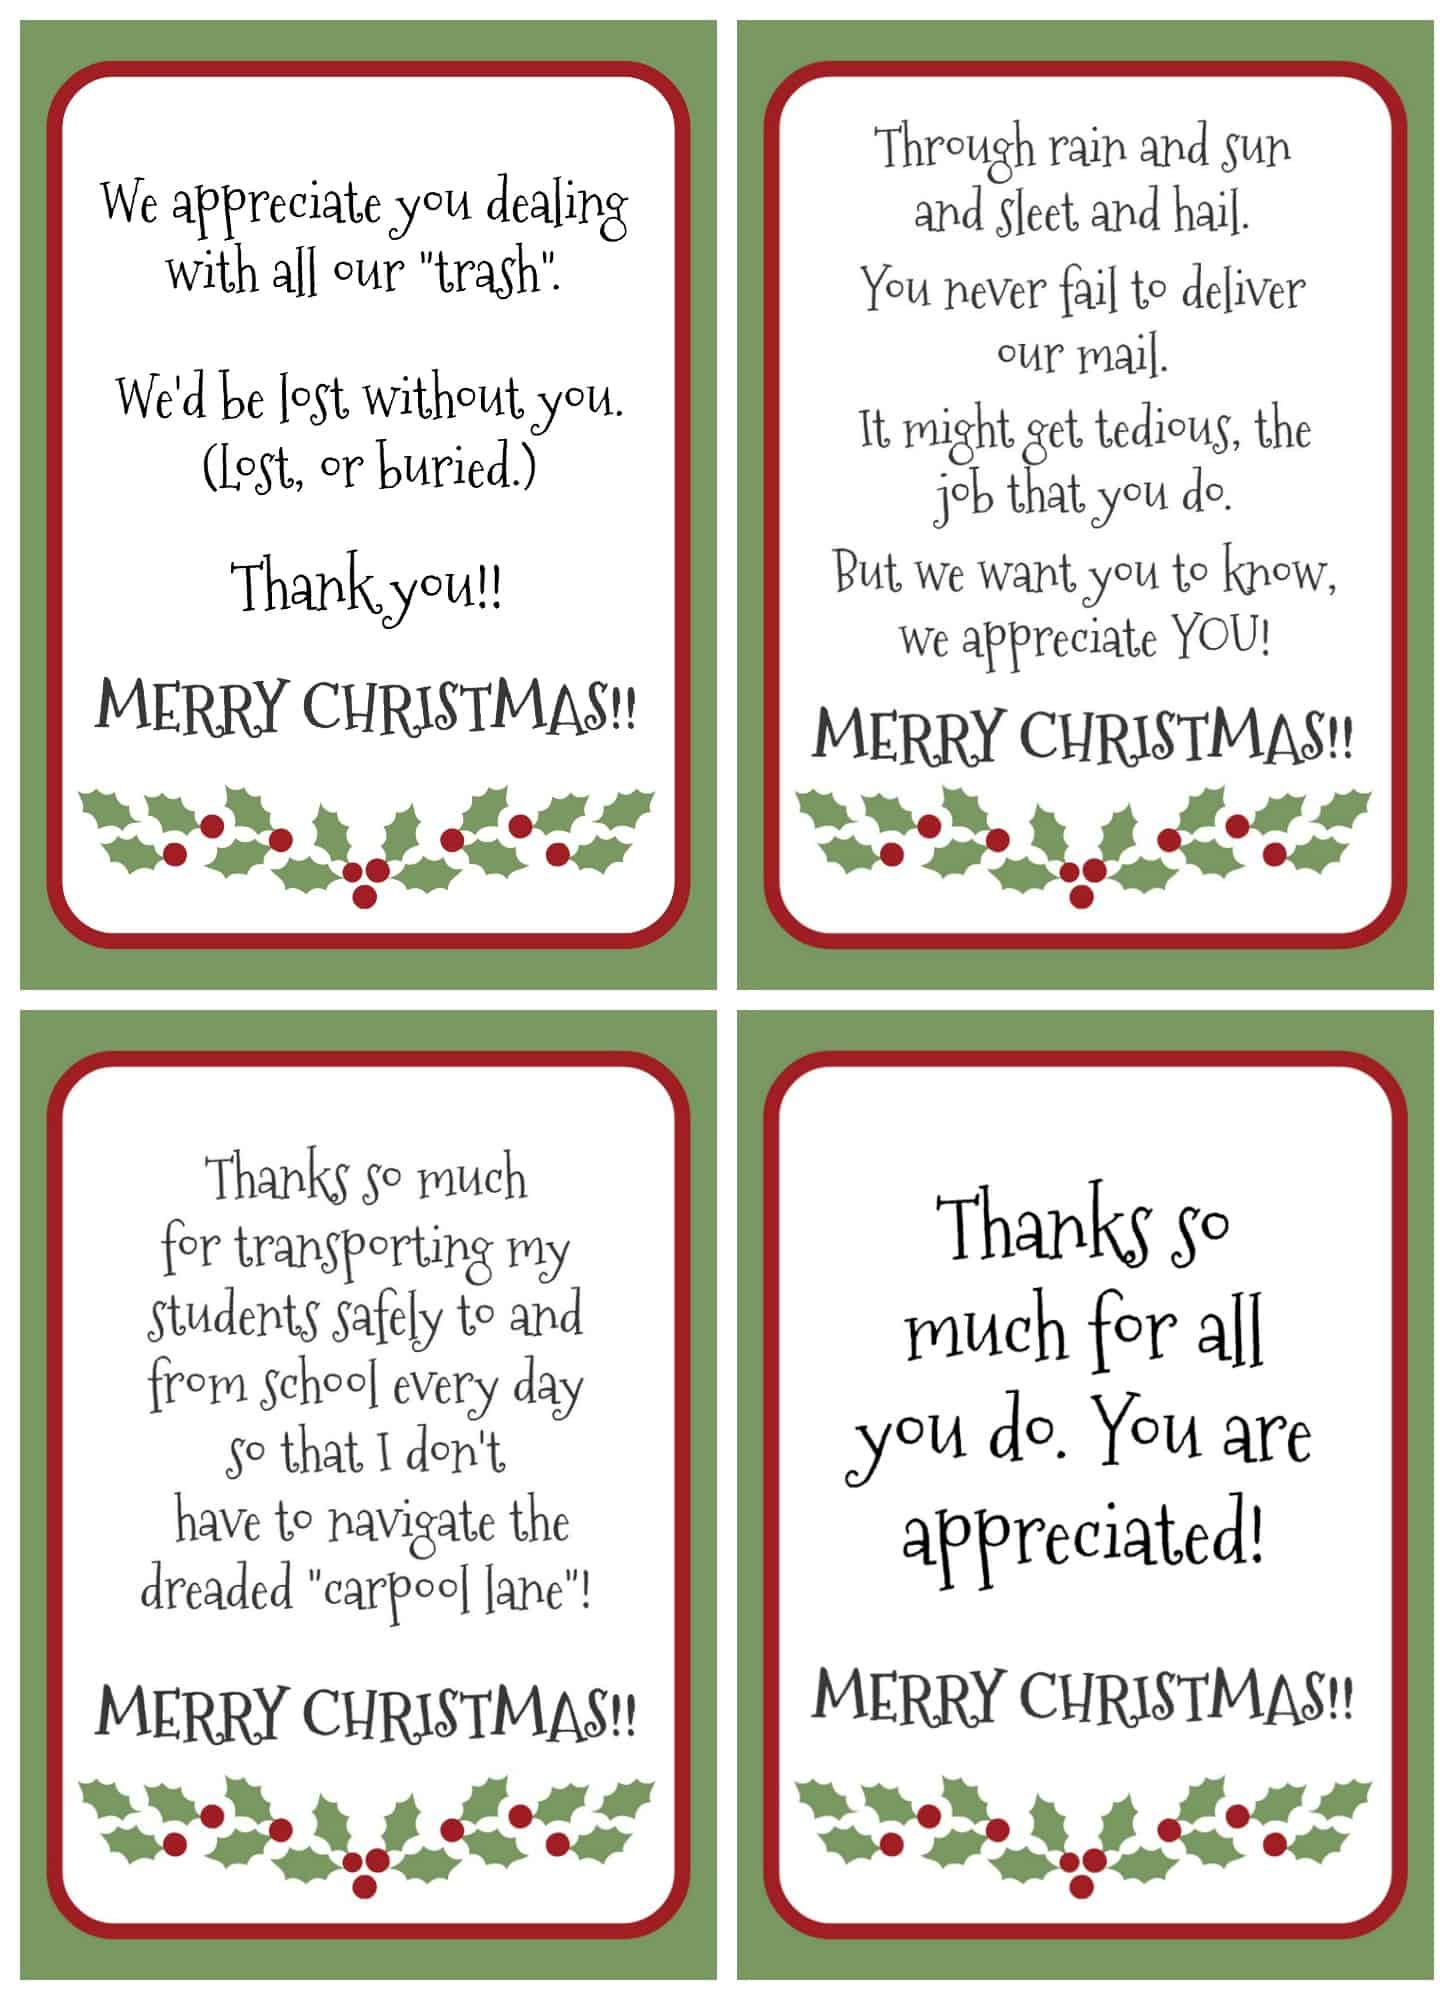 Merry and Bright Gift Idea with Printable Tag